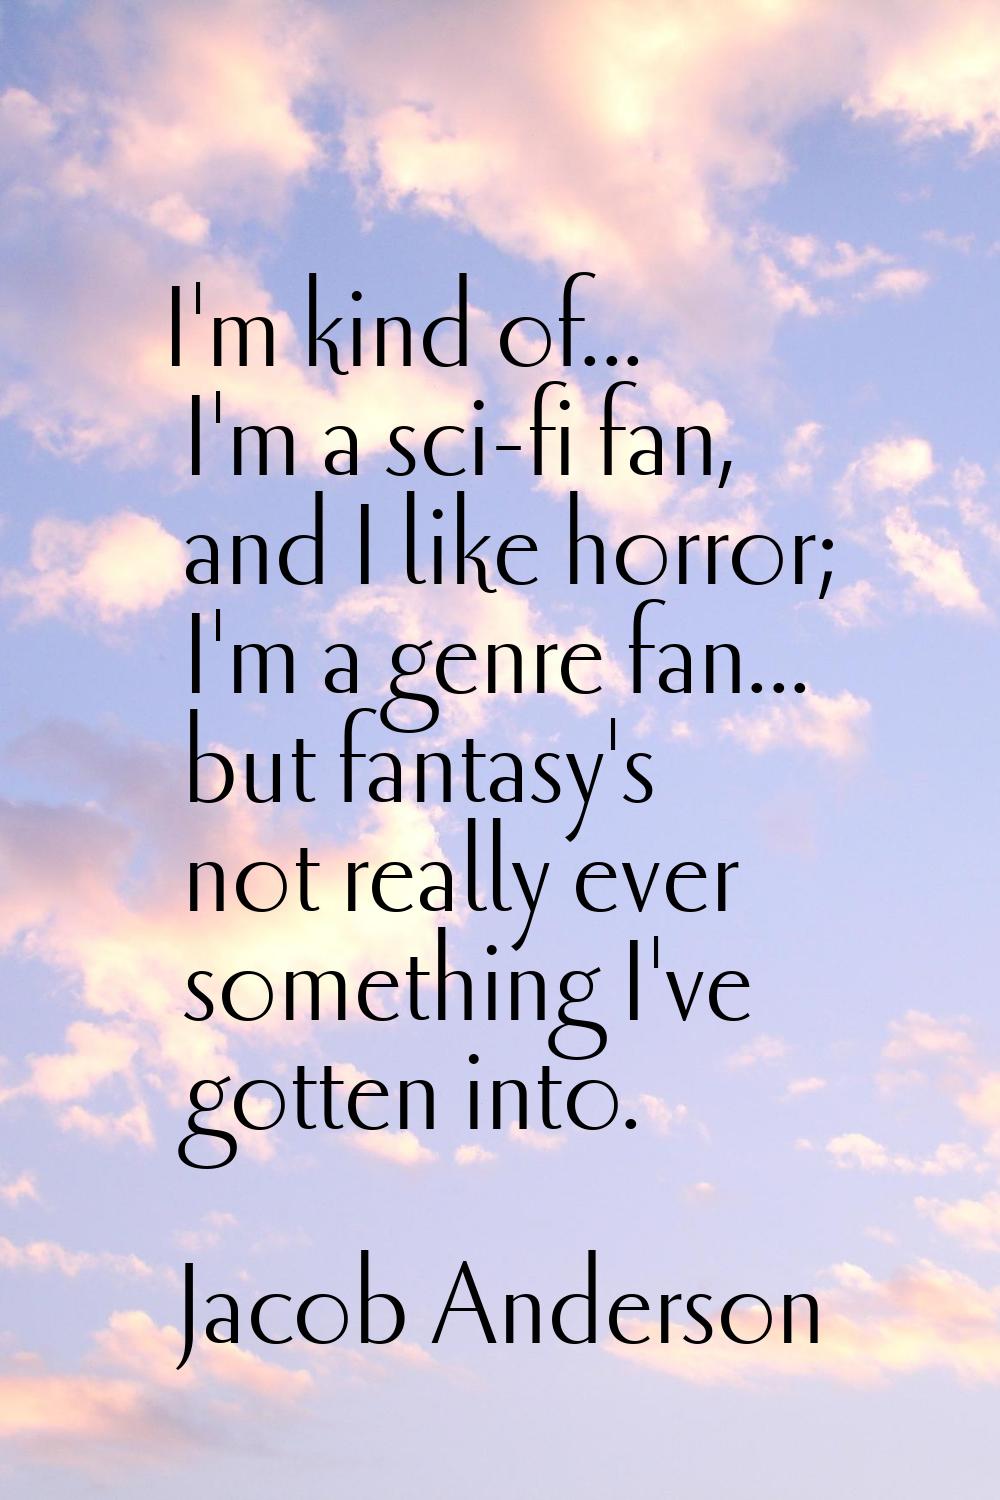 I'm kind of... I'm a sci-fi fan, and I like horror; I'm a genre fan... but fantasy's not really eve